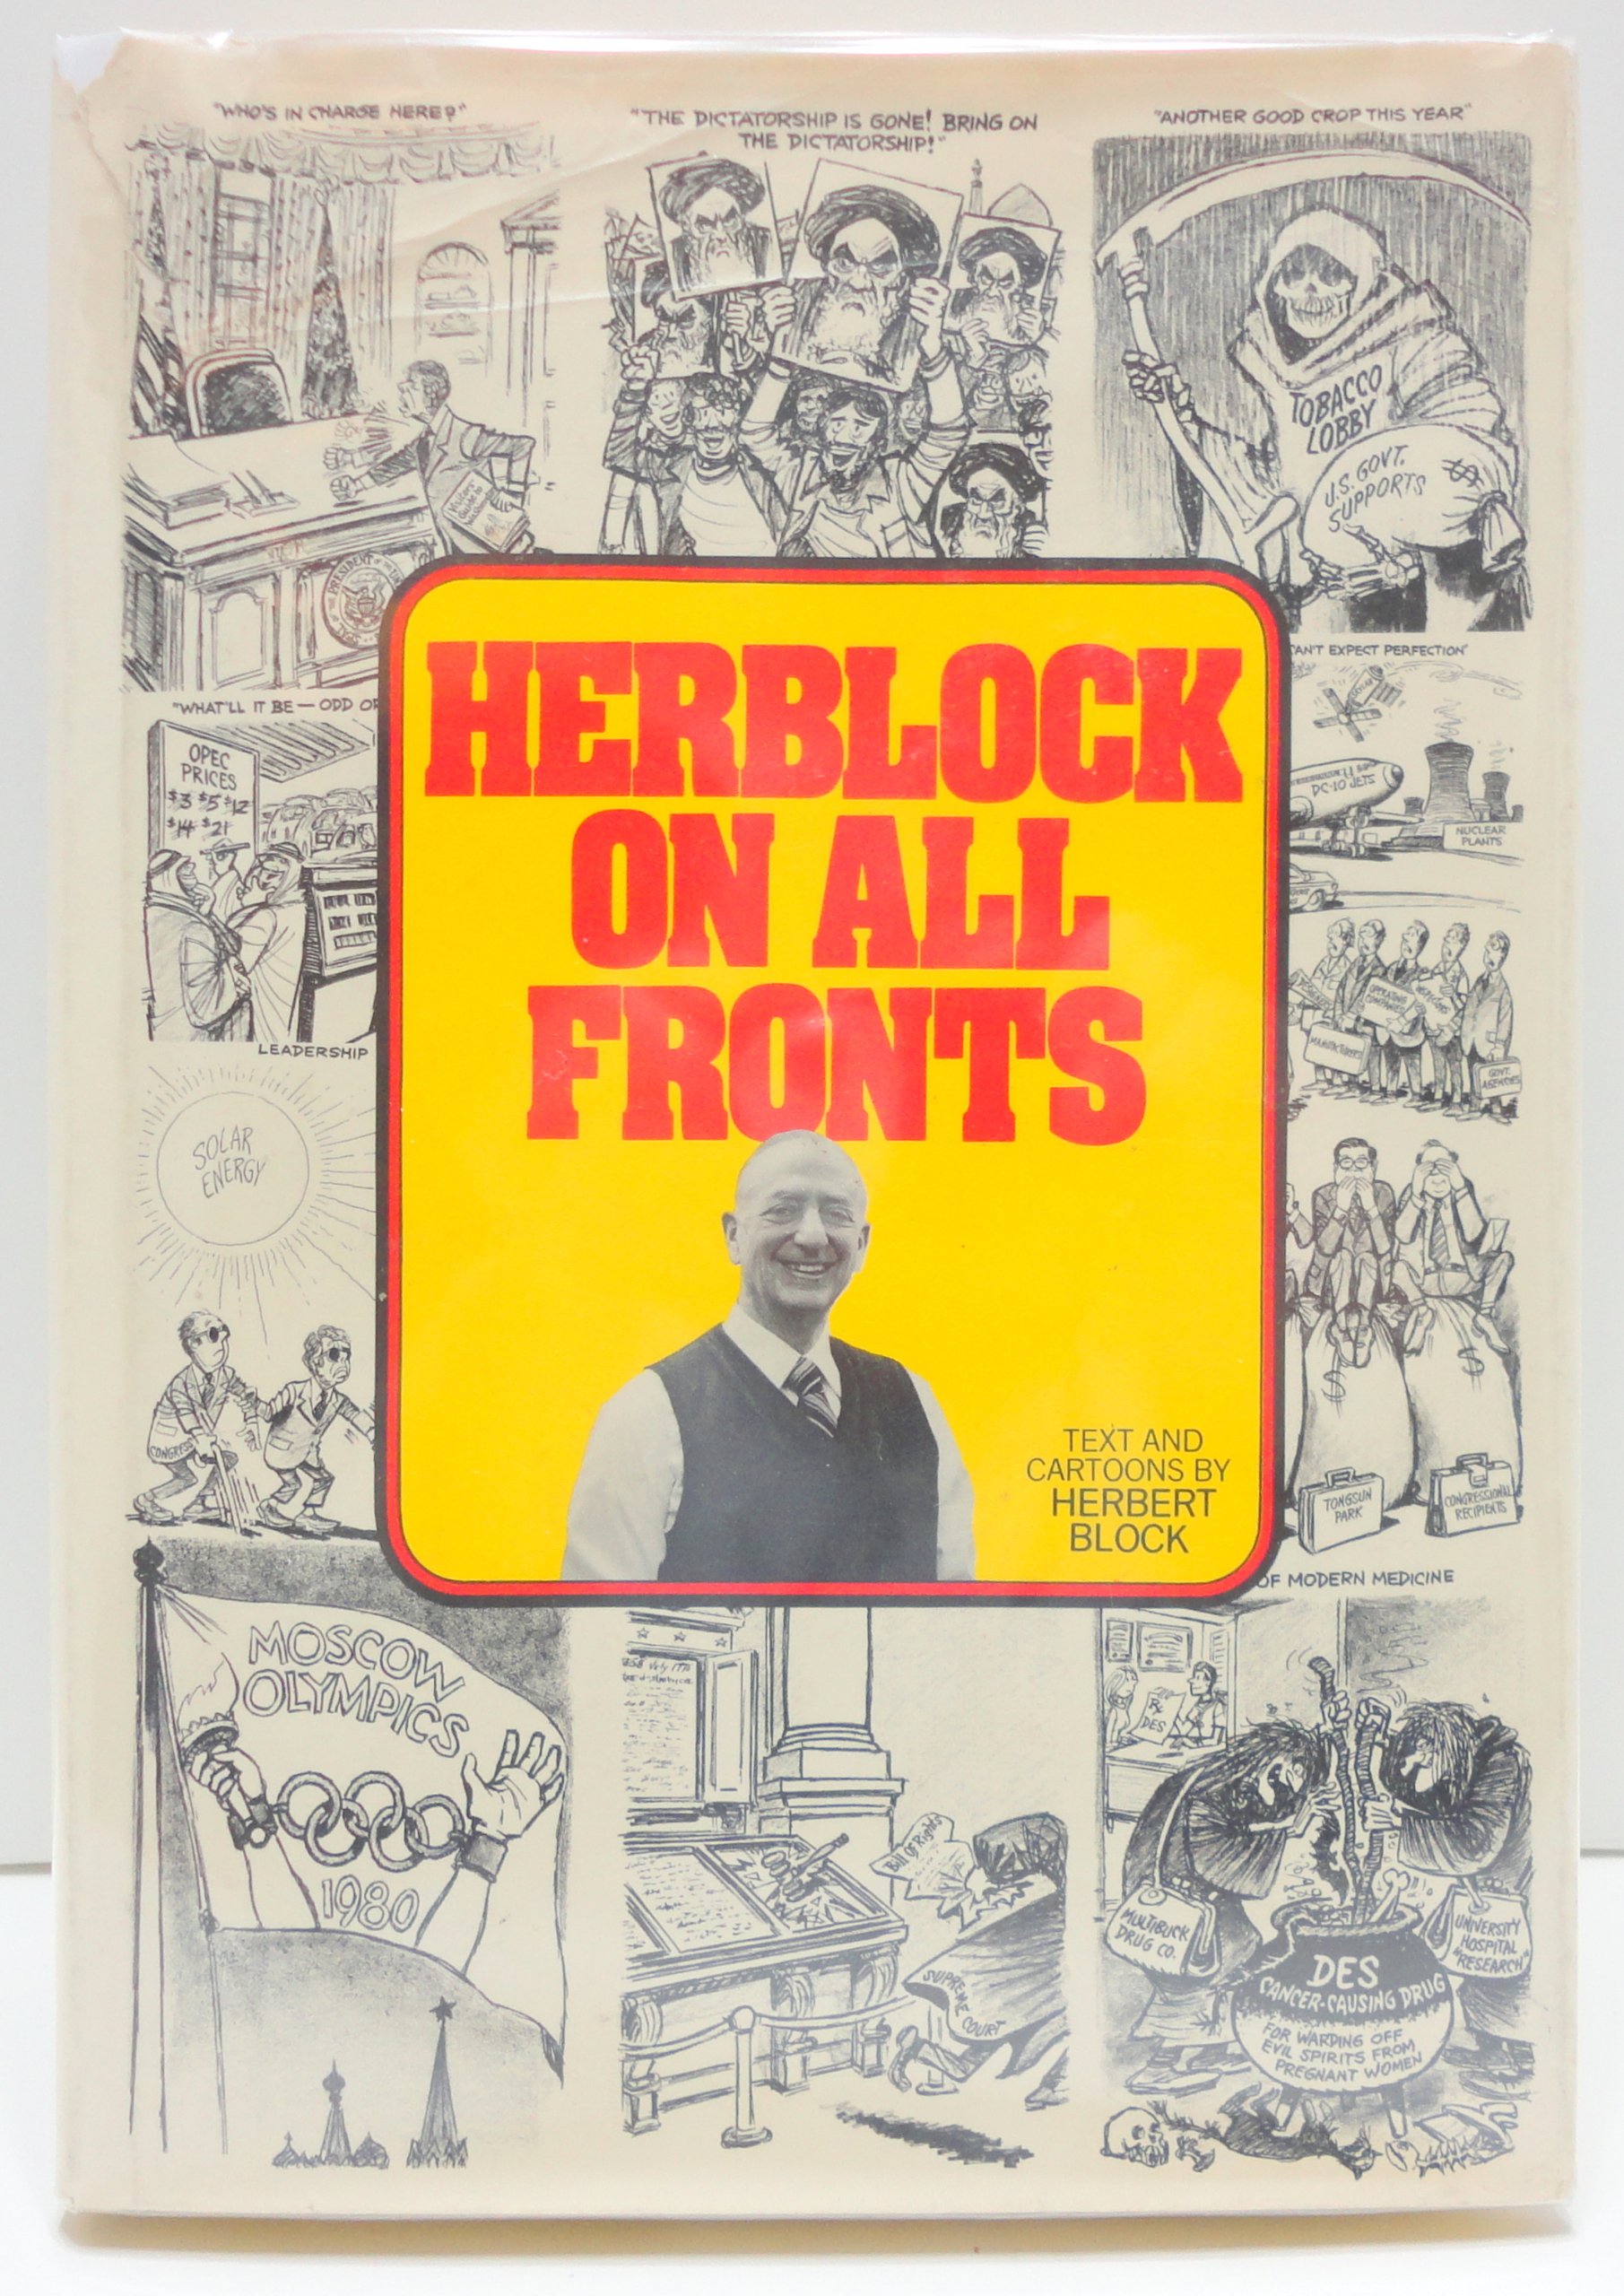 Herblock on all fronts magazine reviews